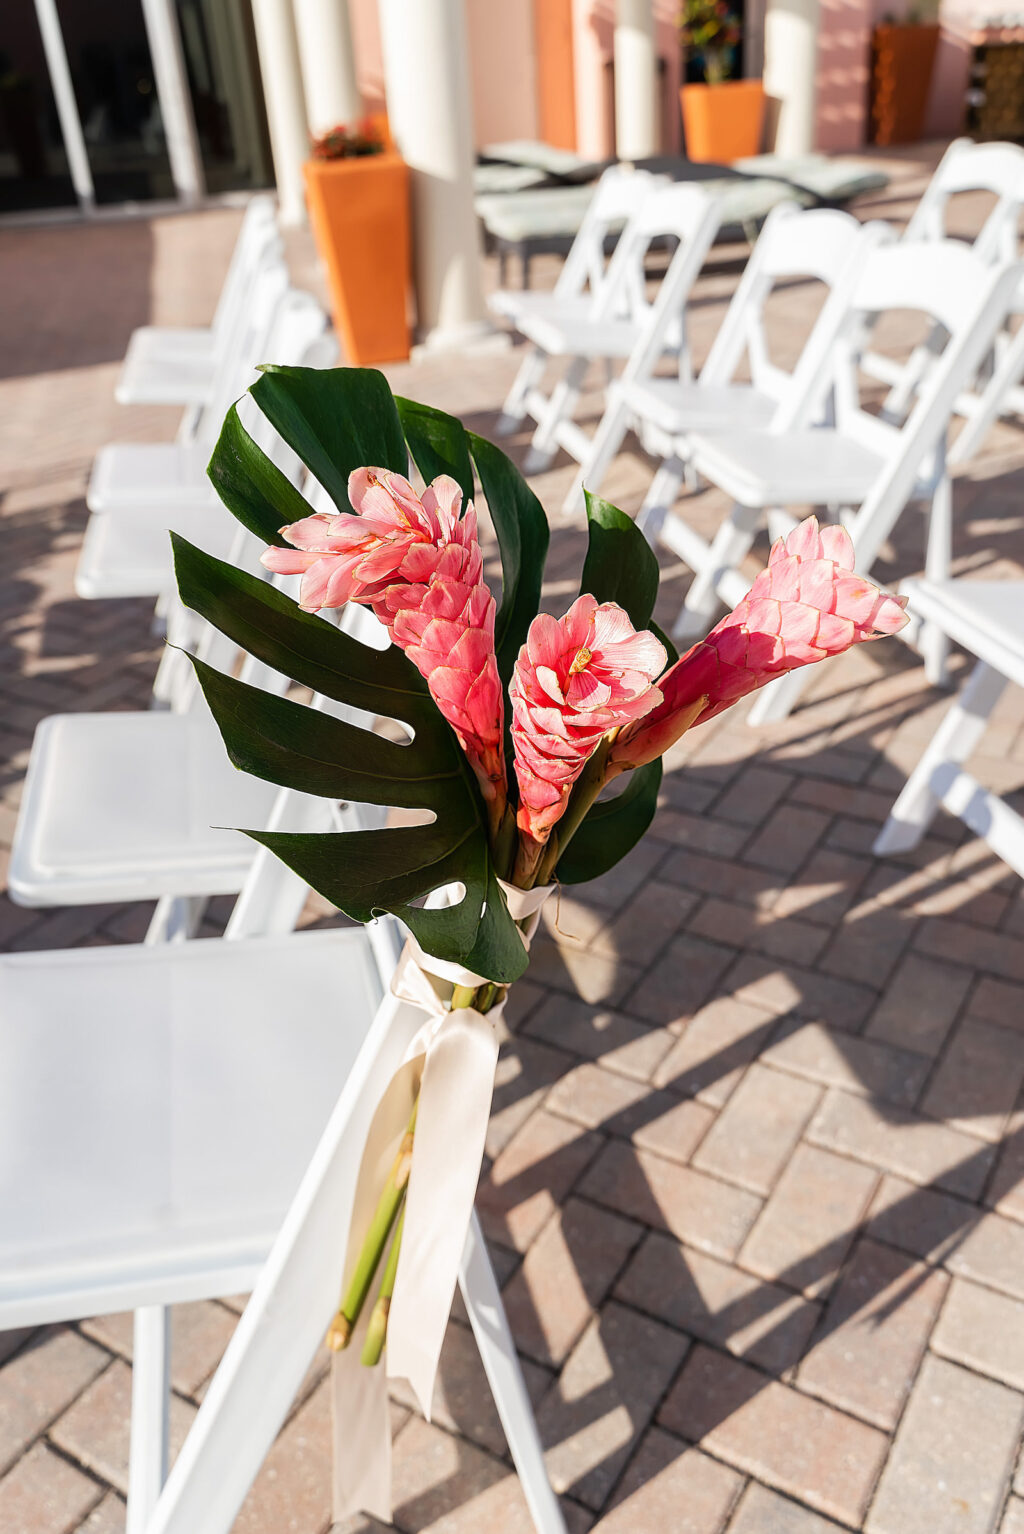 Rooftop Wedding Ceremony Decor, White Patio Folding Chairs, Tropical Monstera Palm Leaf and Pink Ginger Floral Arrangement | Tampa Bay Wedding Photographer Limelight Photography